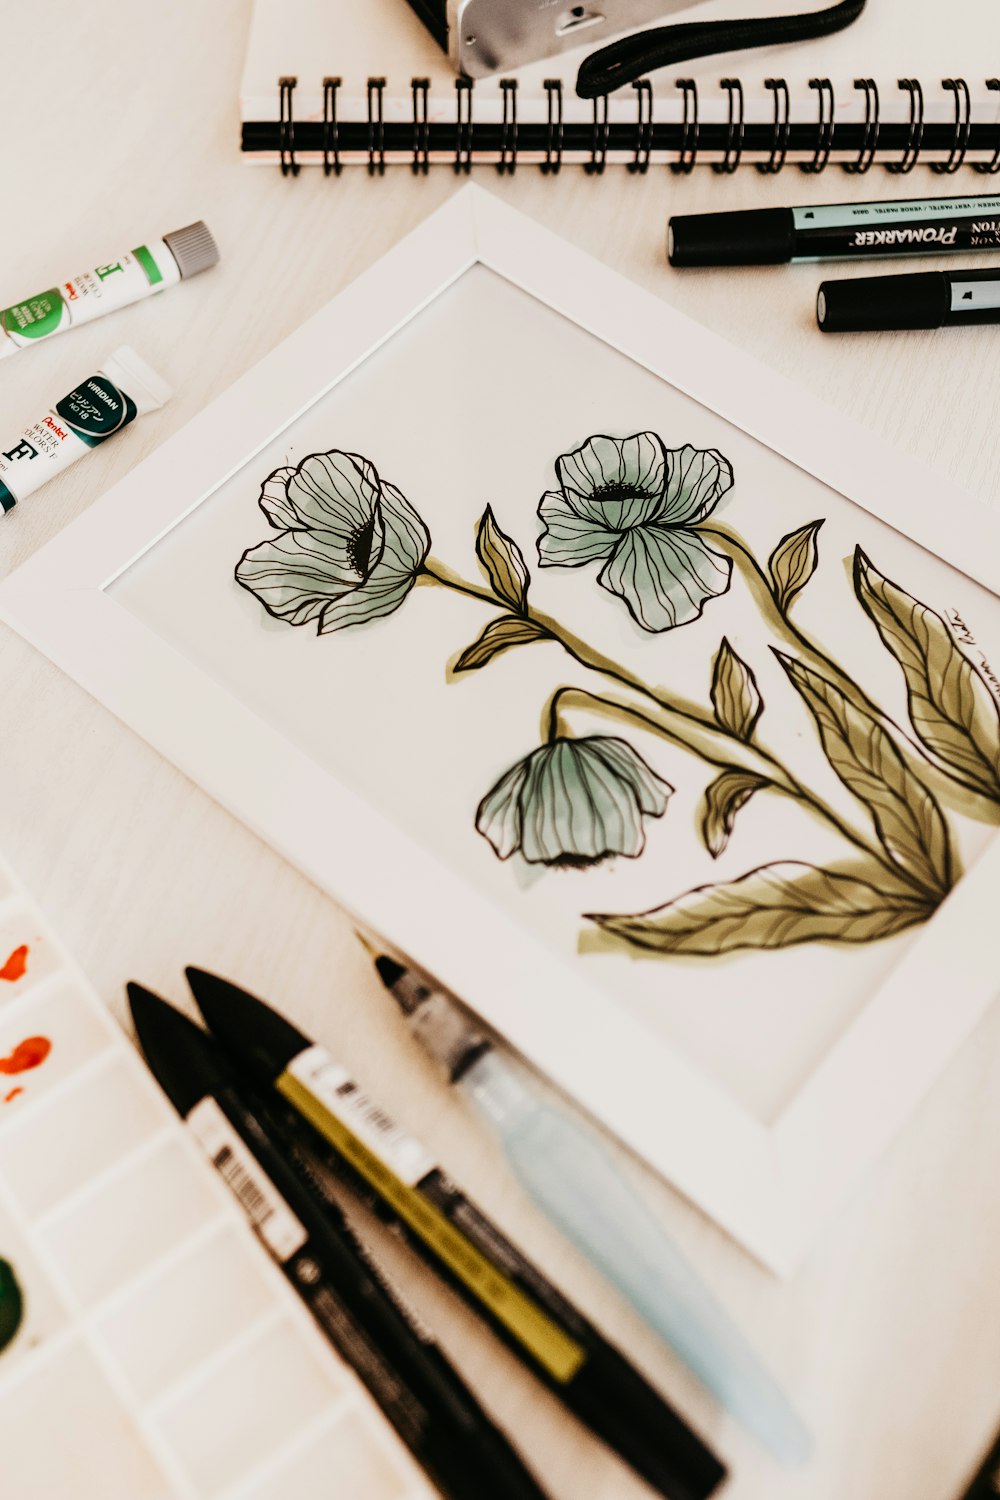 Green and blue flower drawing photo – Free Art Image on Unsplash